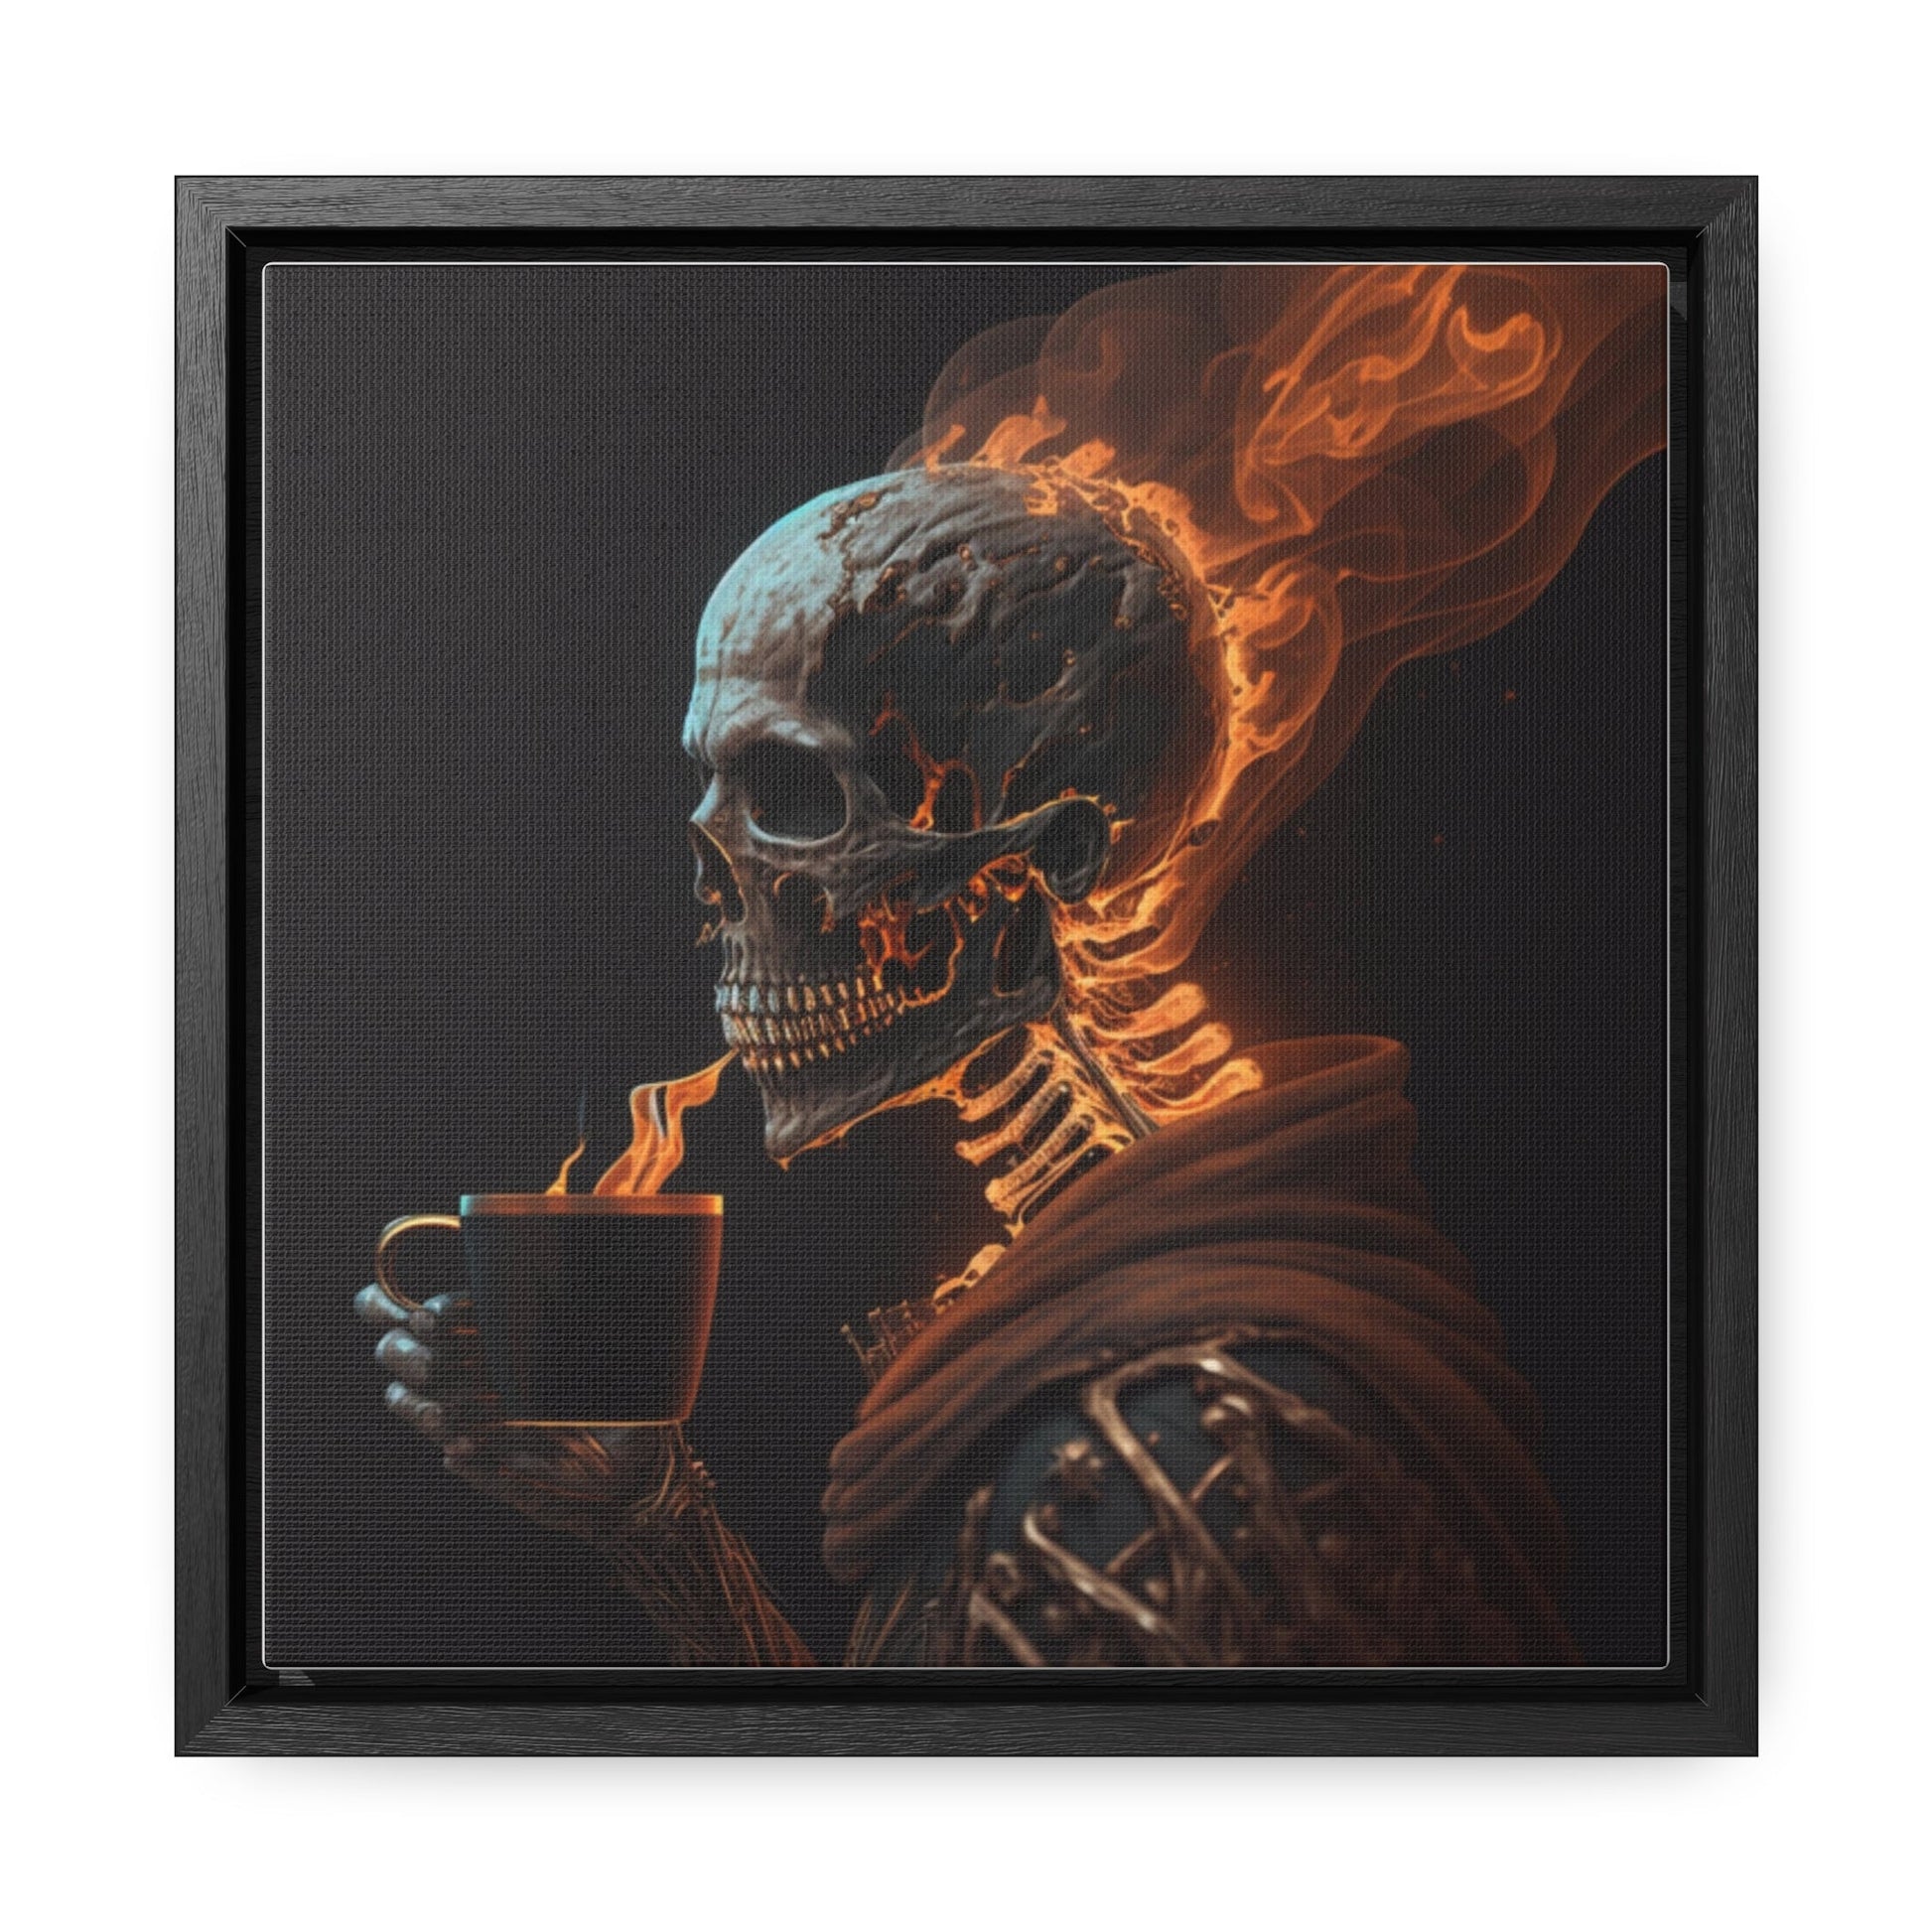 Flaming Hot Coffee Gallery Canvas Wraps, Square Frame-Shalav5